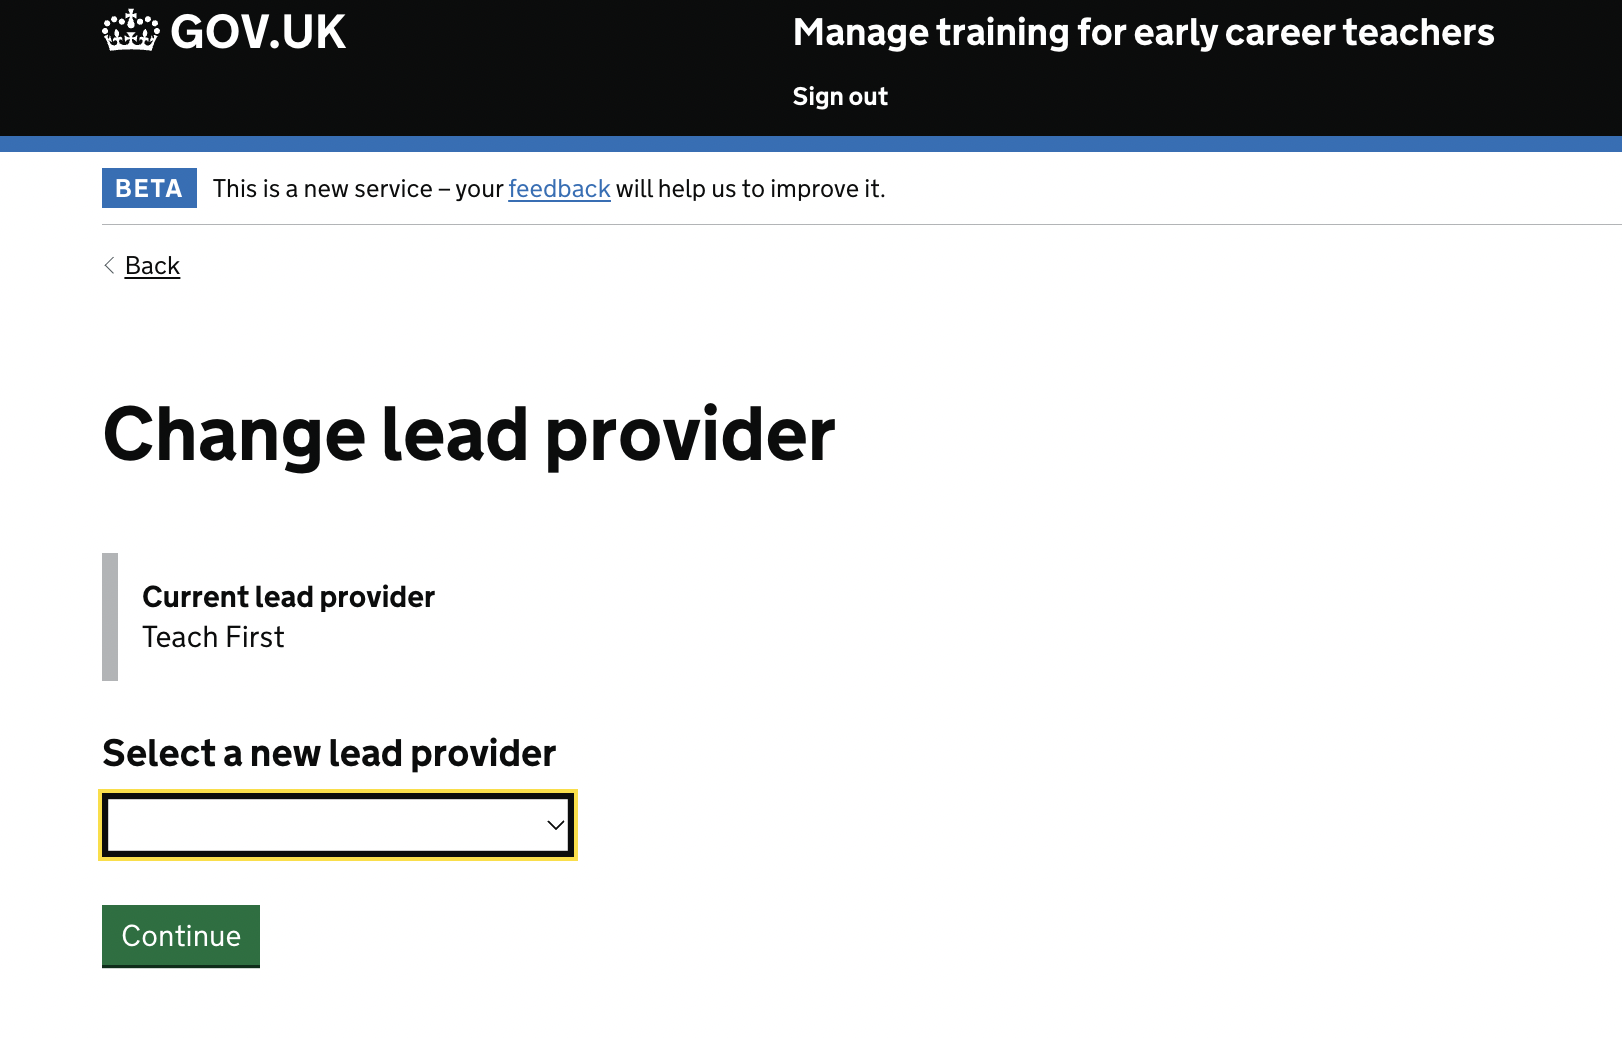 Screenshot of the 'Change lead provider' page